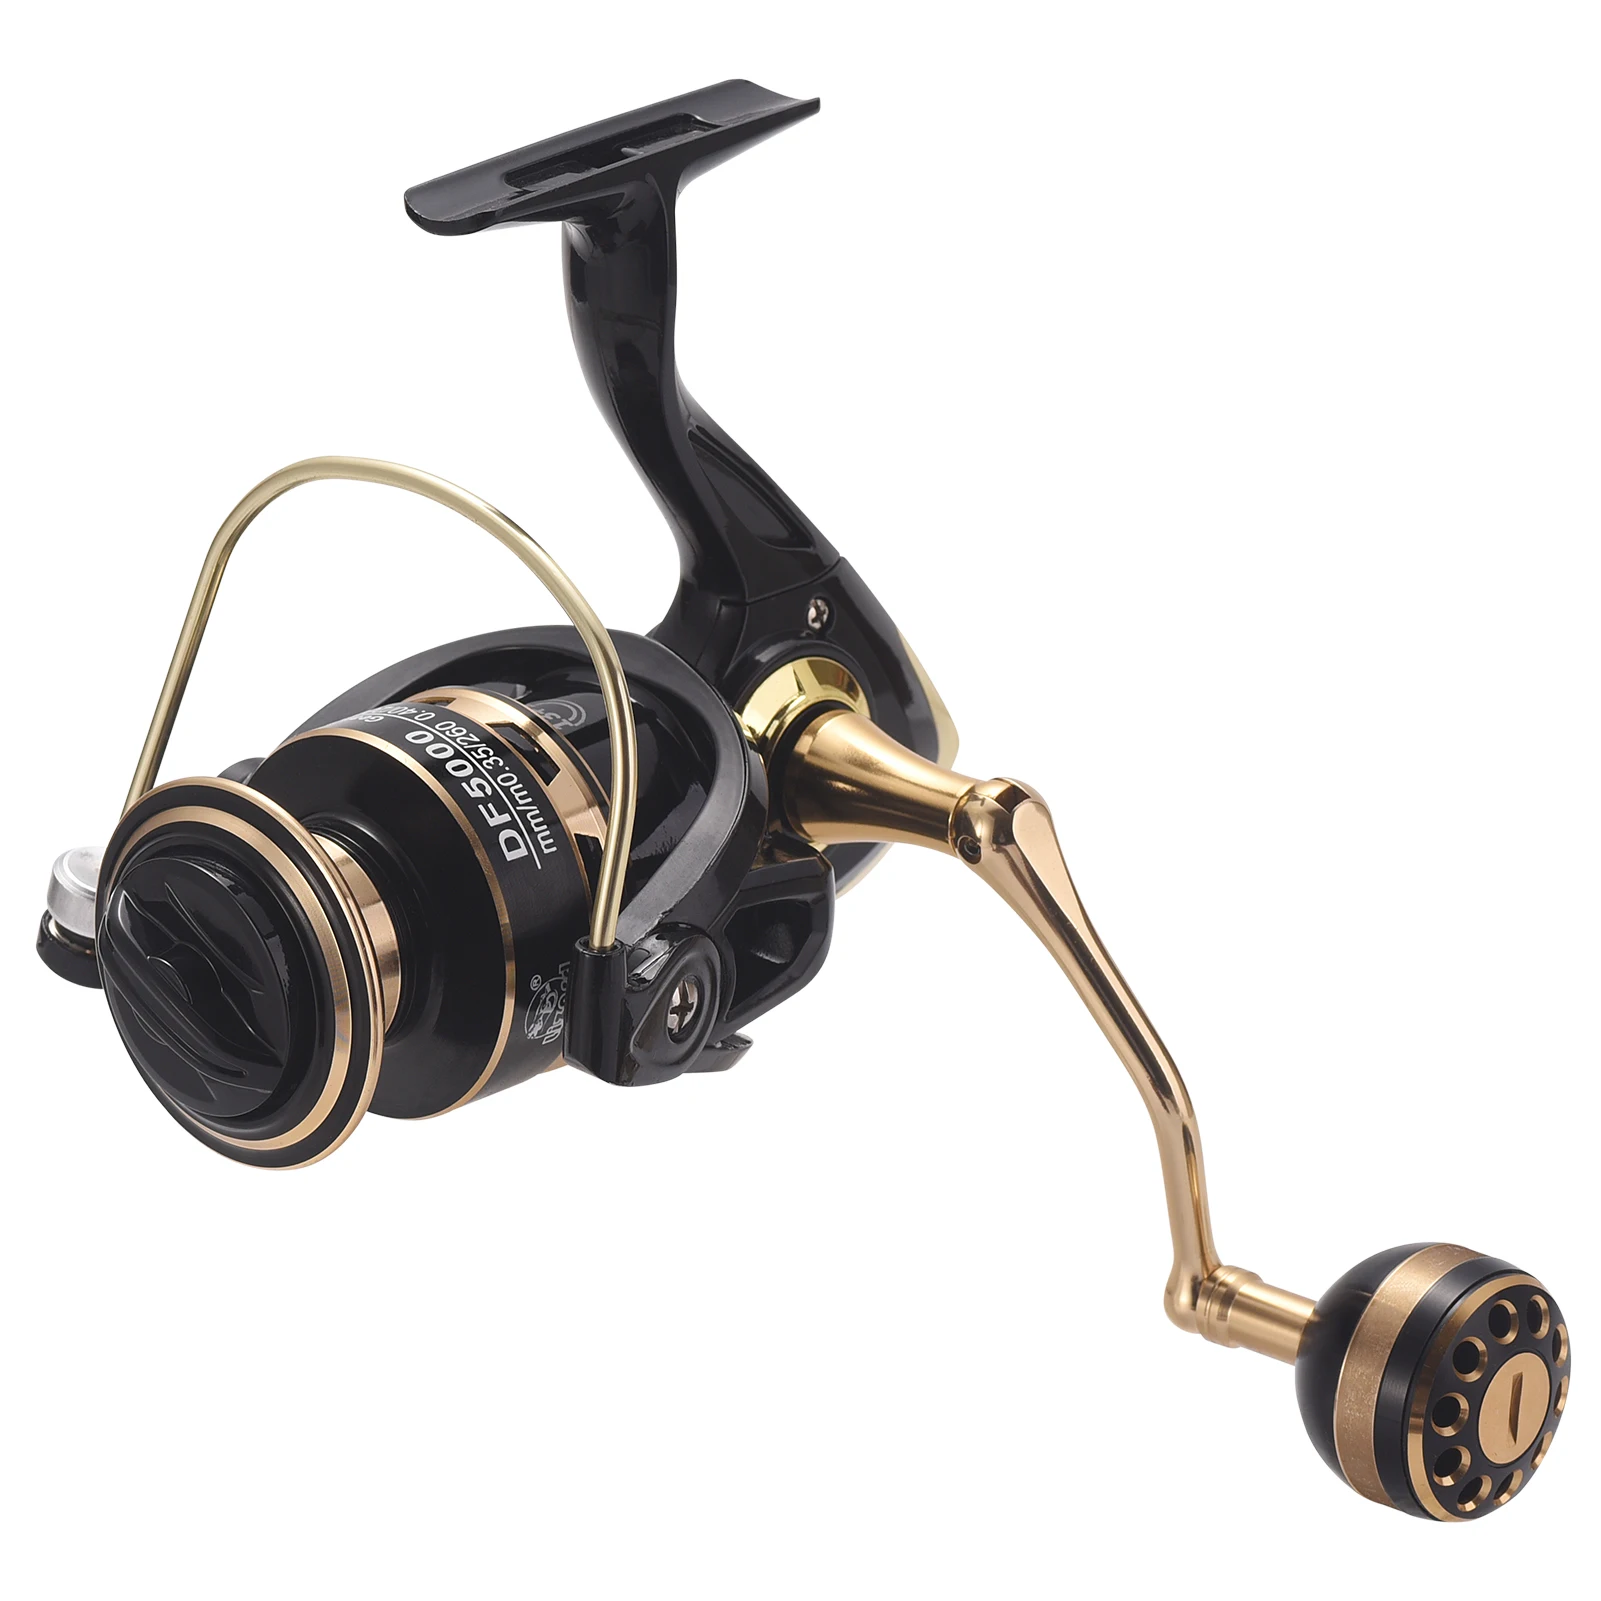 

13+1BB Spinning Reel Fishing reels 5.2:1 with Interchangeable Left and Right Handle for Saltwater Bait Casting